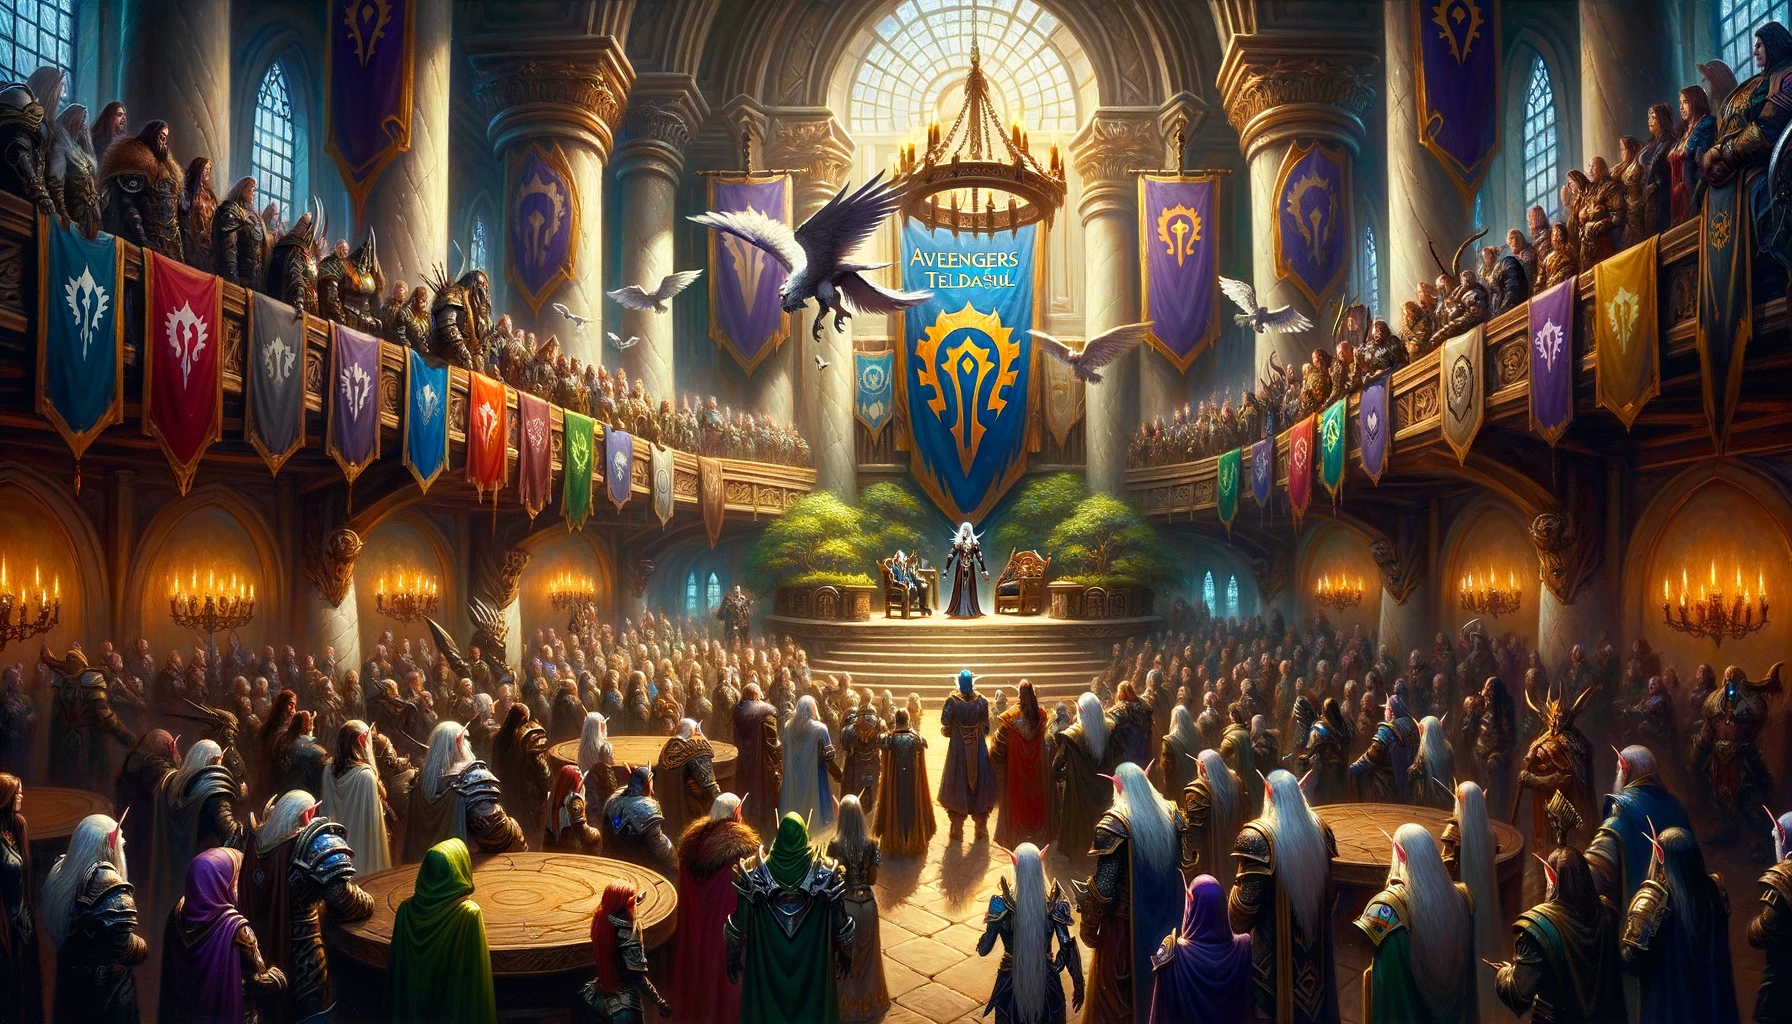 An oil painting of Myrwen addressing the guild members from a raised platform.